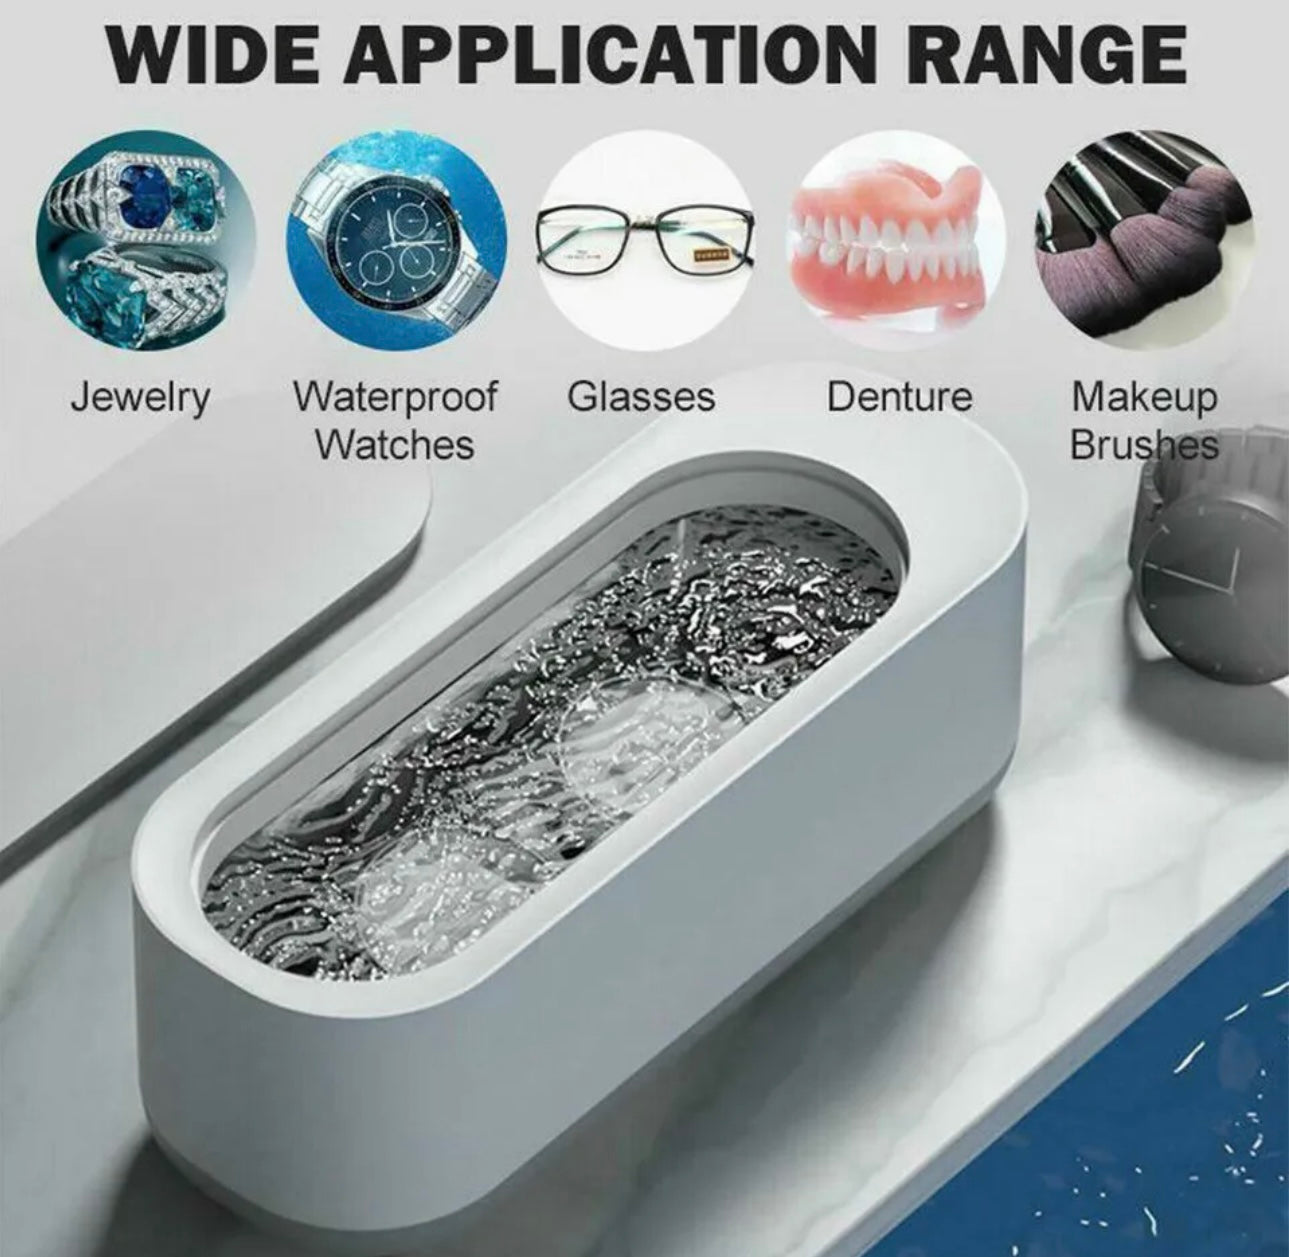 Portable Household Professional Ultrasonic Jewelry Cleaner Timer Vibration Wash Cleaner Washing Jewelry Watch Eye Glasses Ring Cleaning Machine Basket